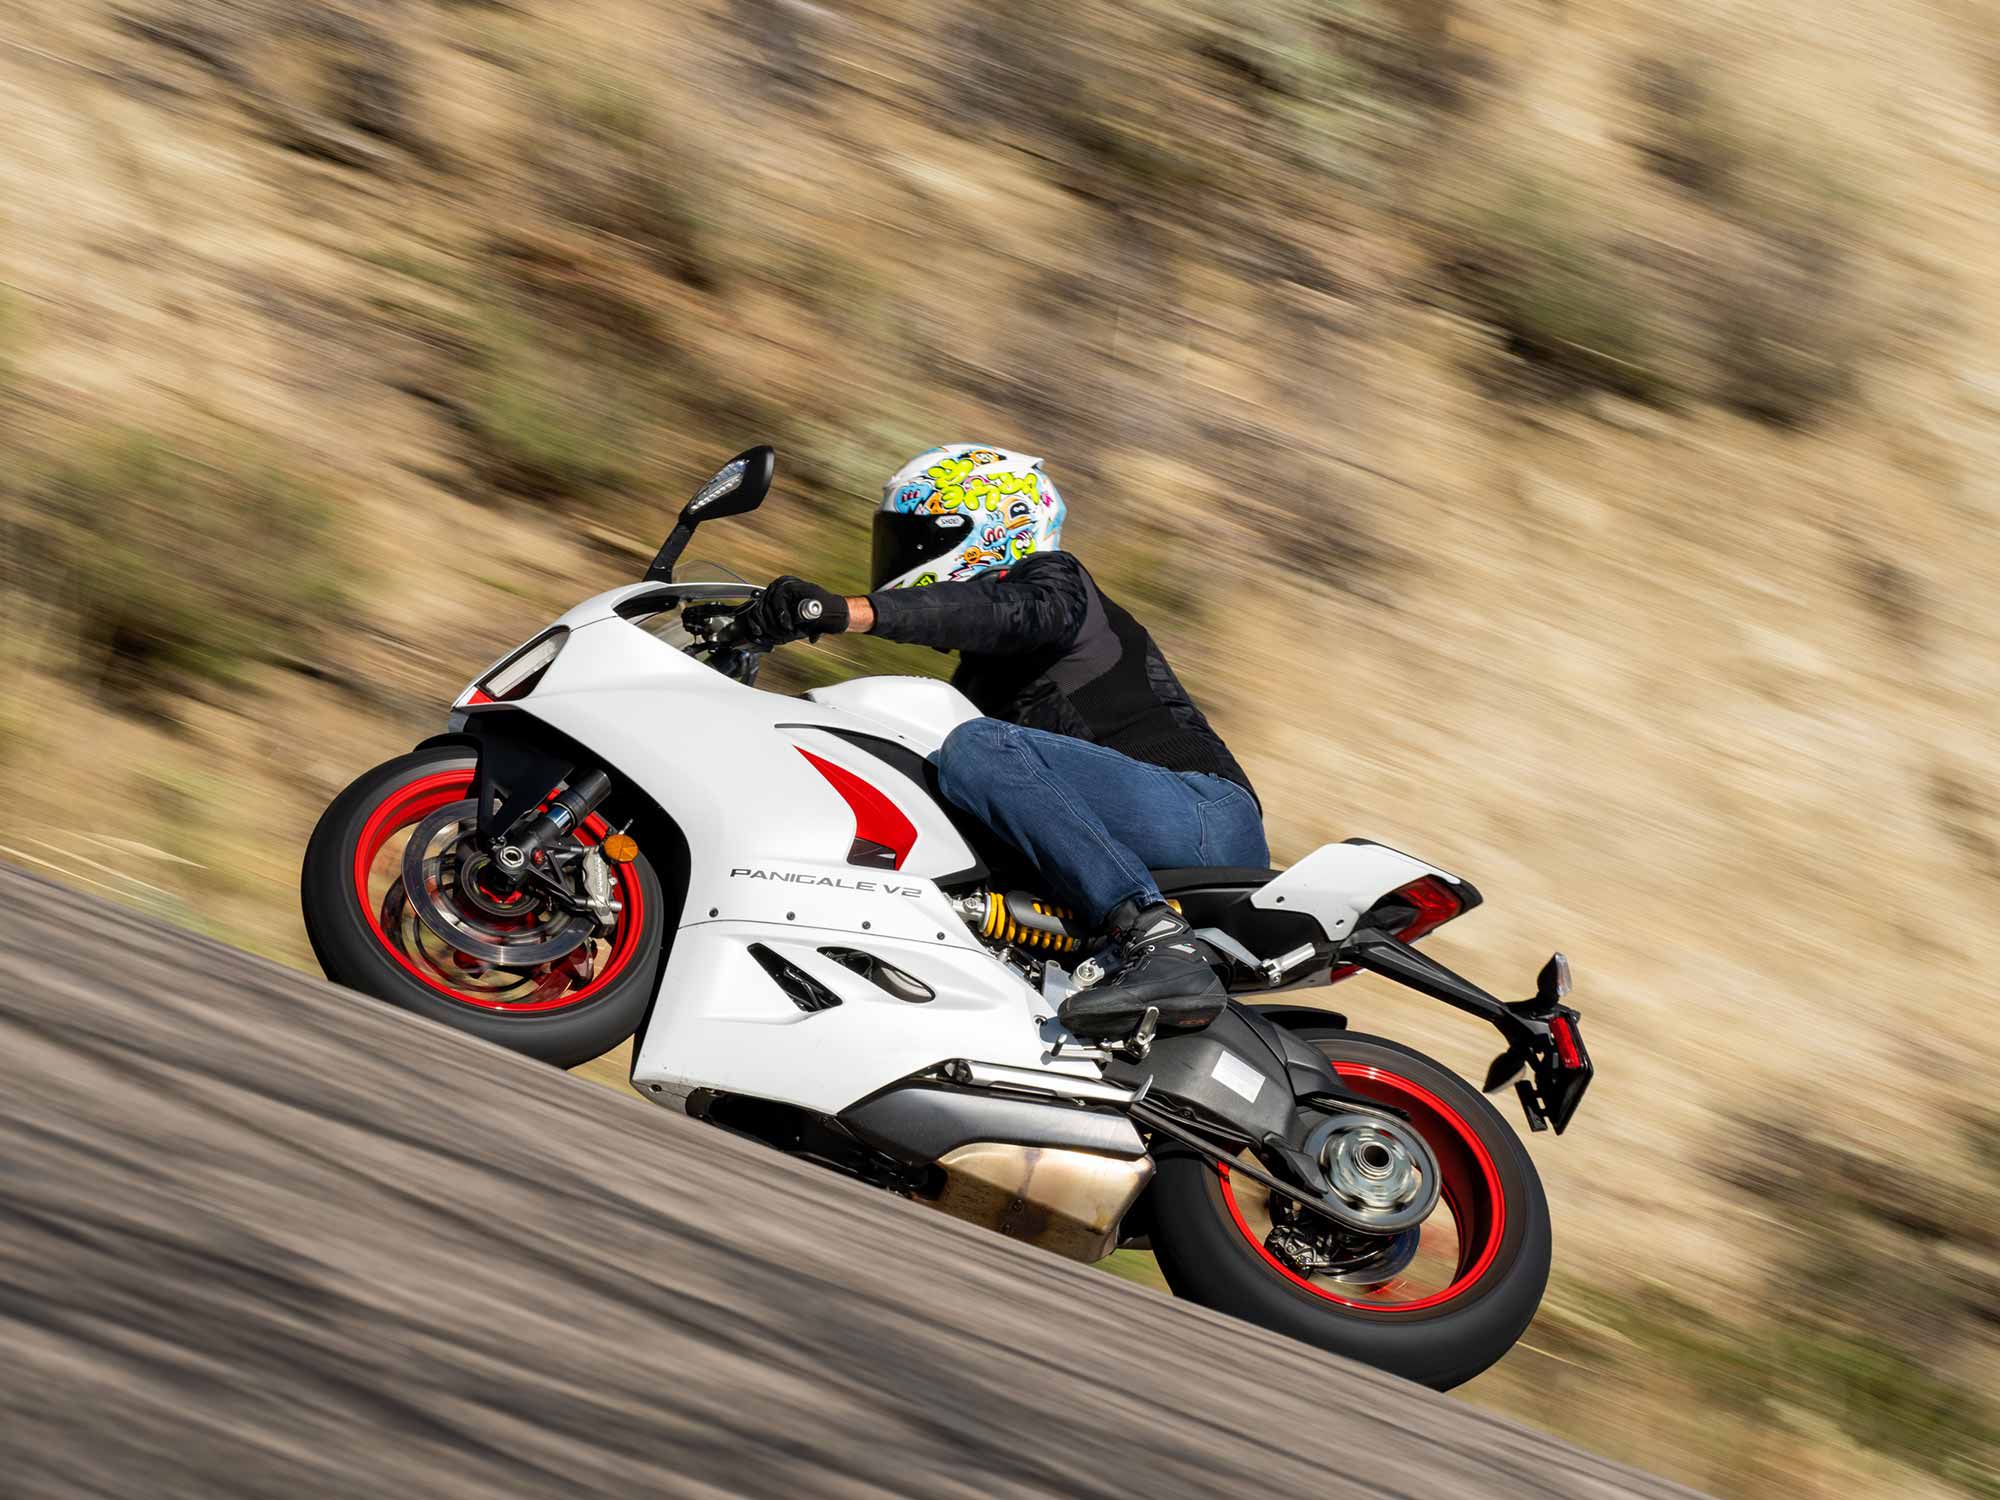 We adore the Panigale V2’s responsive steering. This sportbike loves to turn.